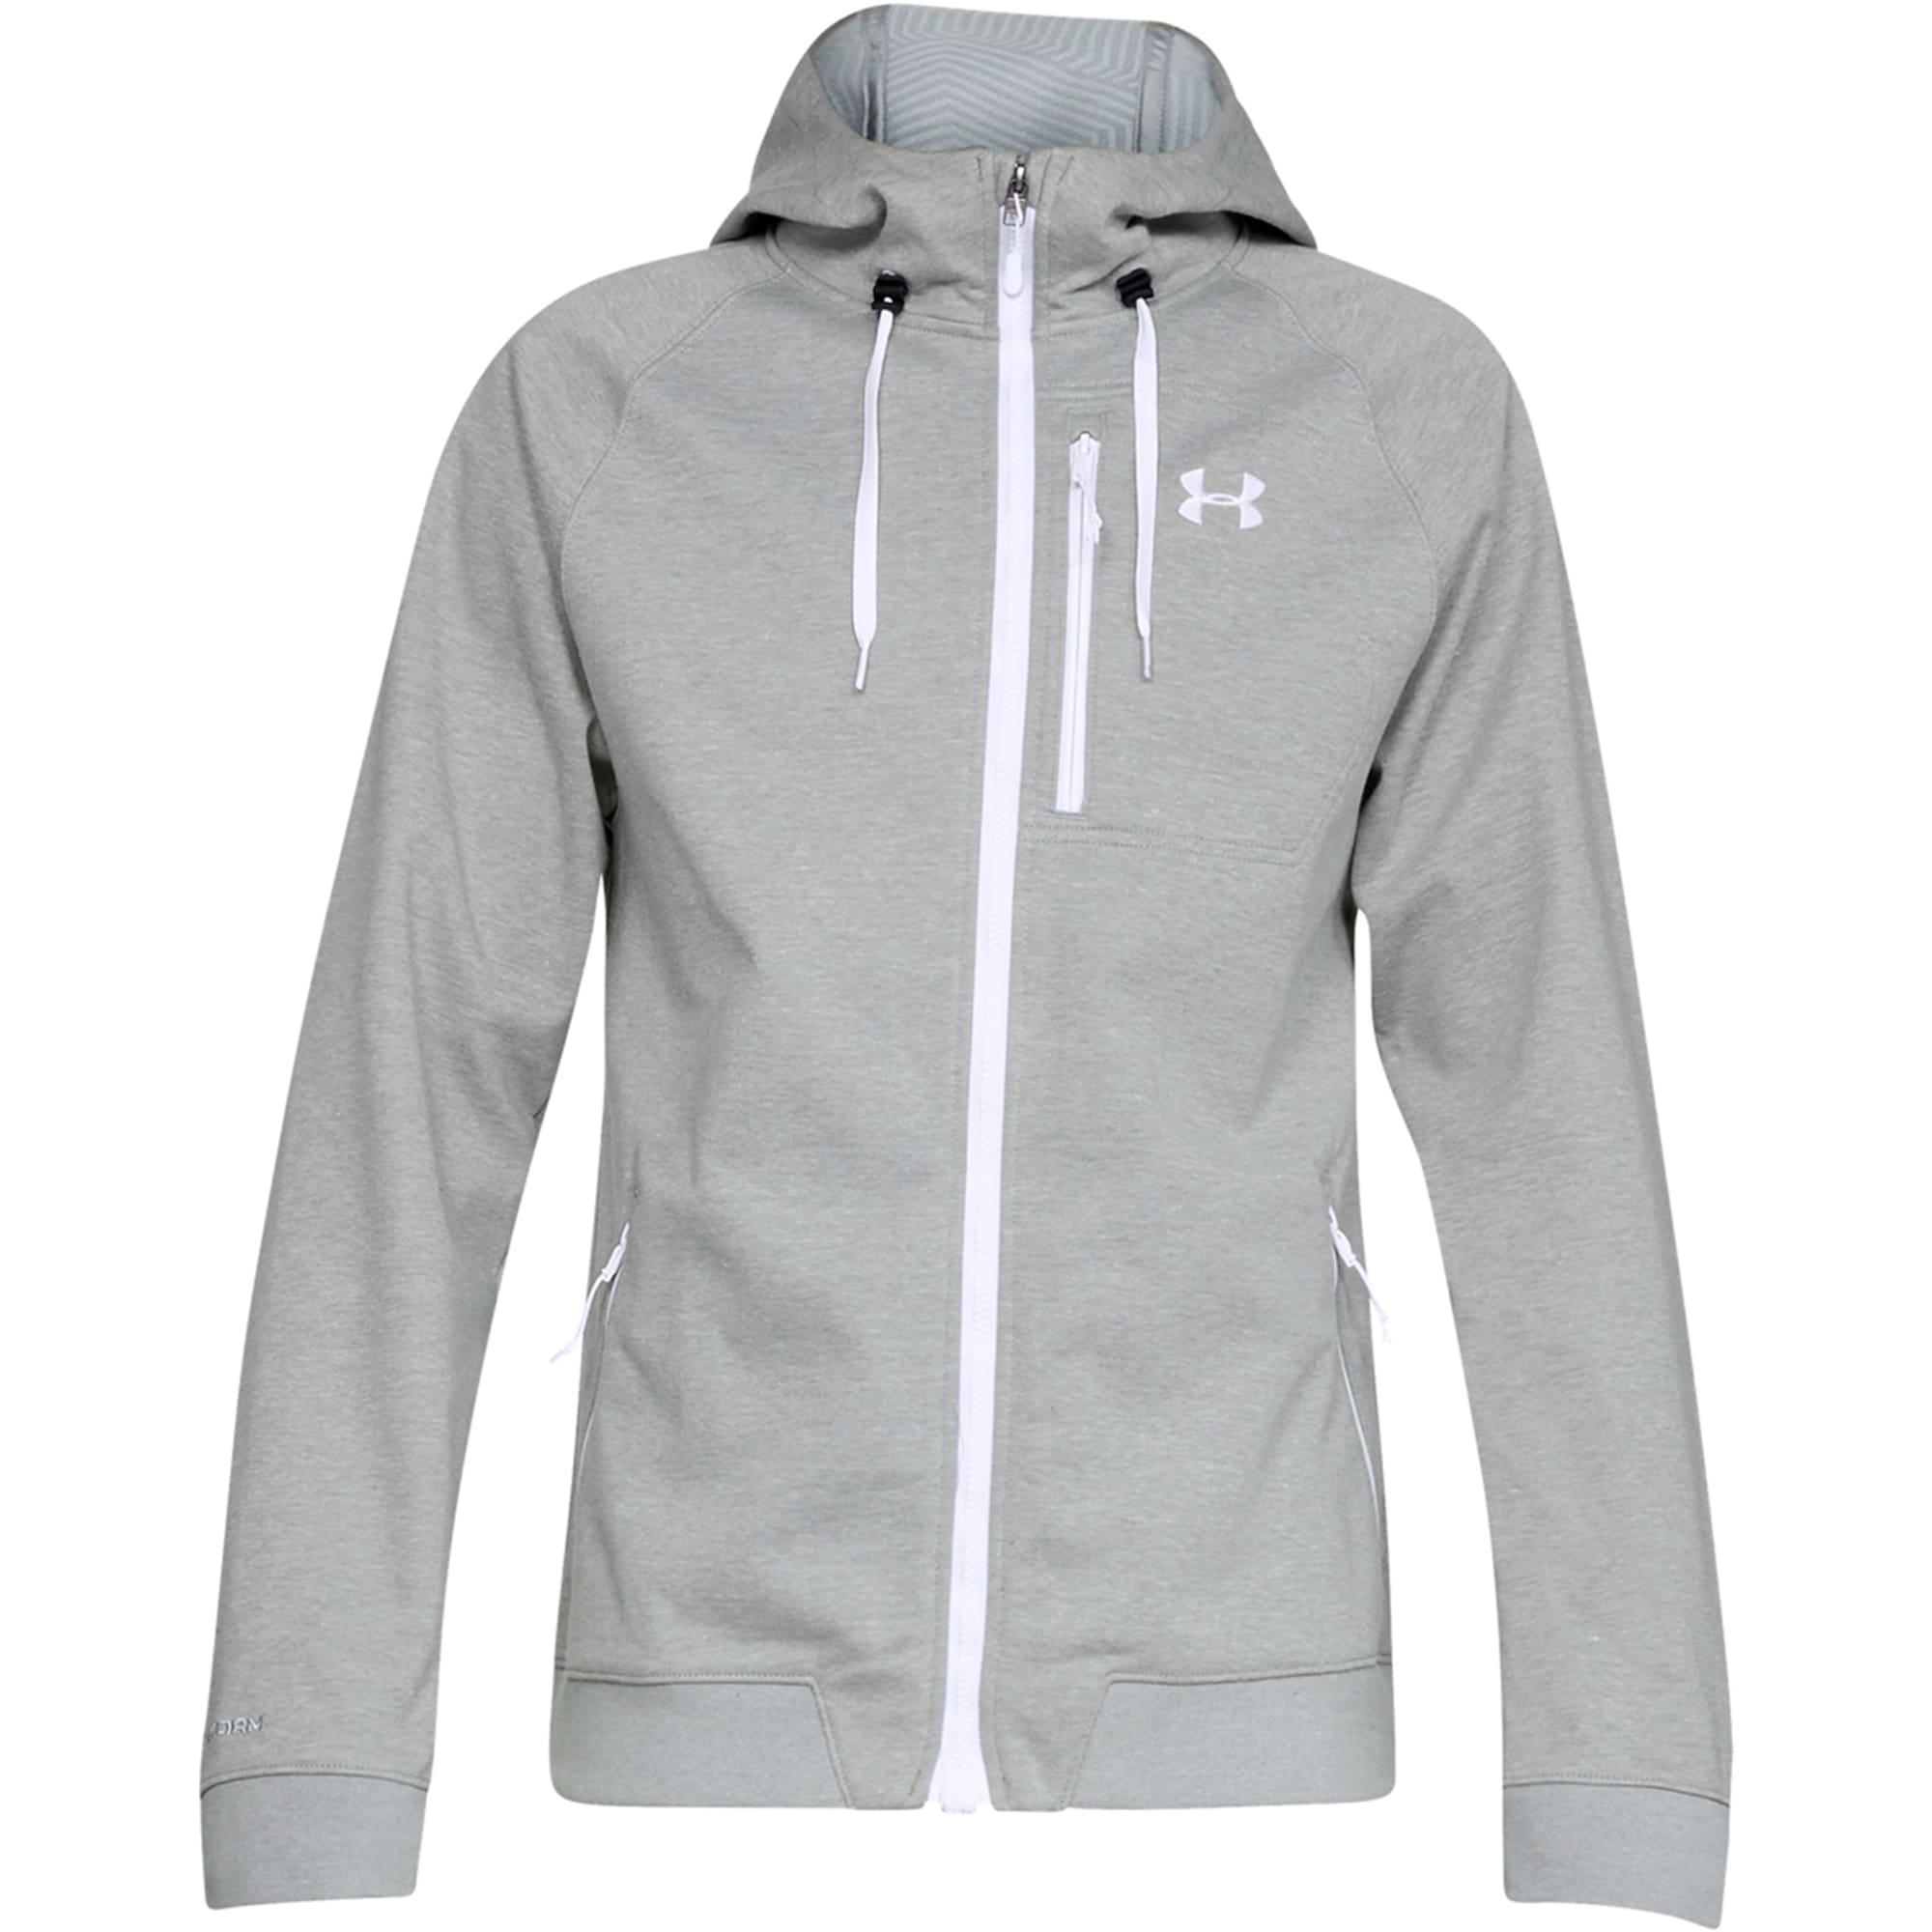 UNDER ARMOUR Men's CGI Dobson Soft Shell Full-Zip Hoodie - Bob's Stores